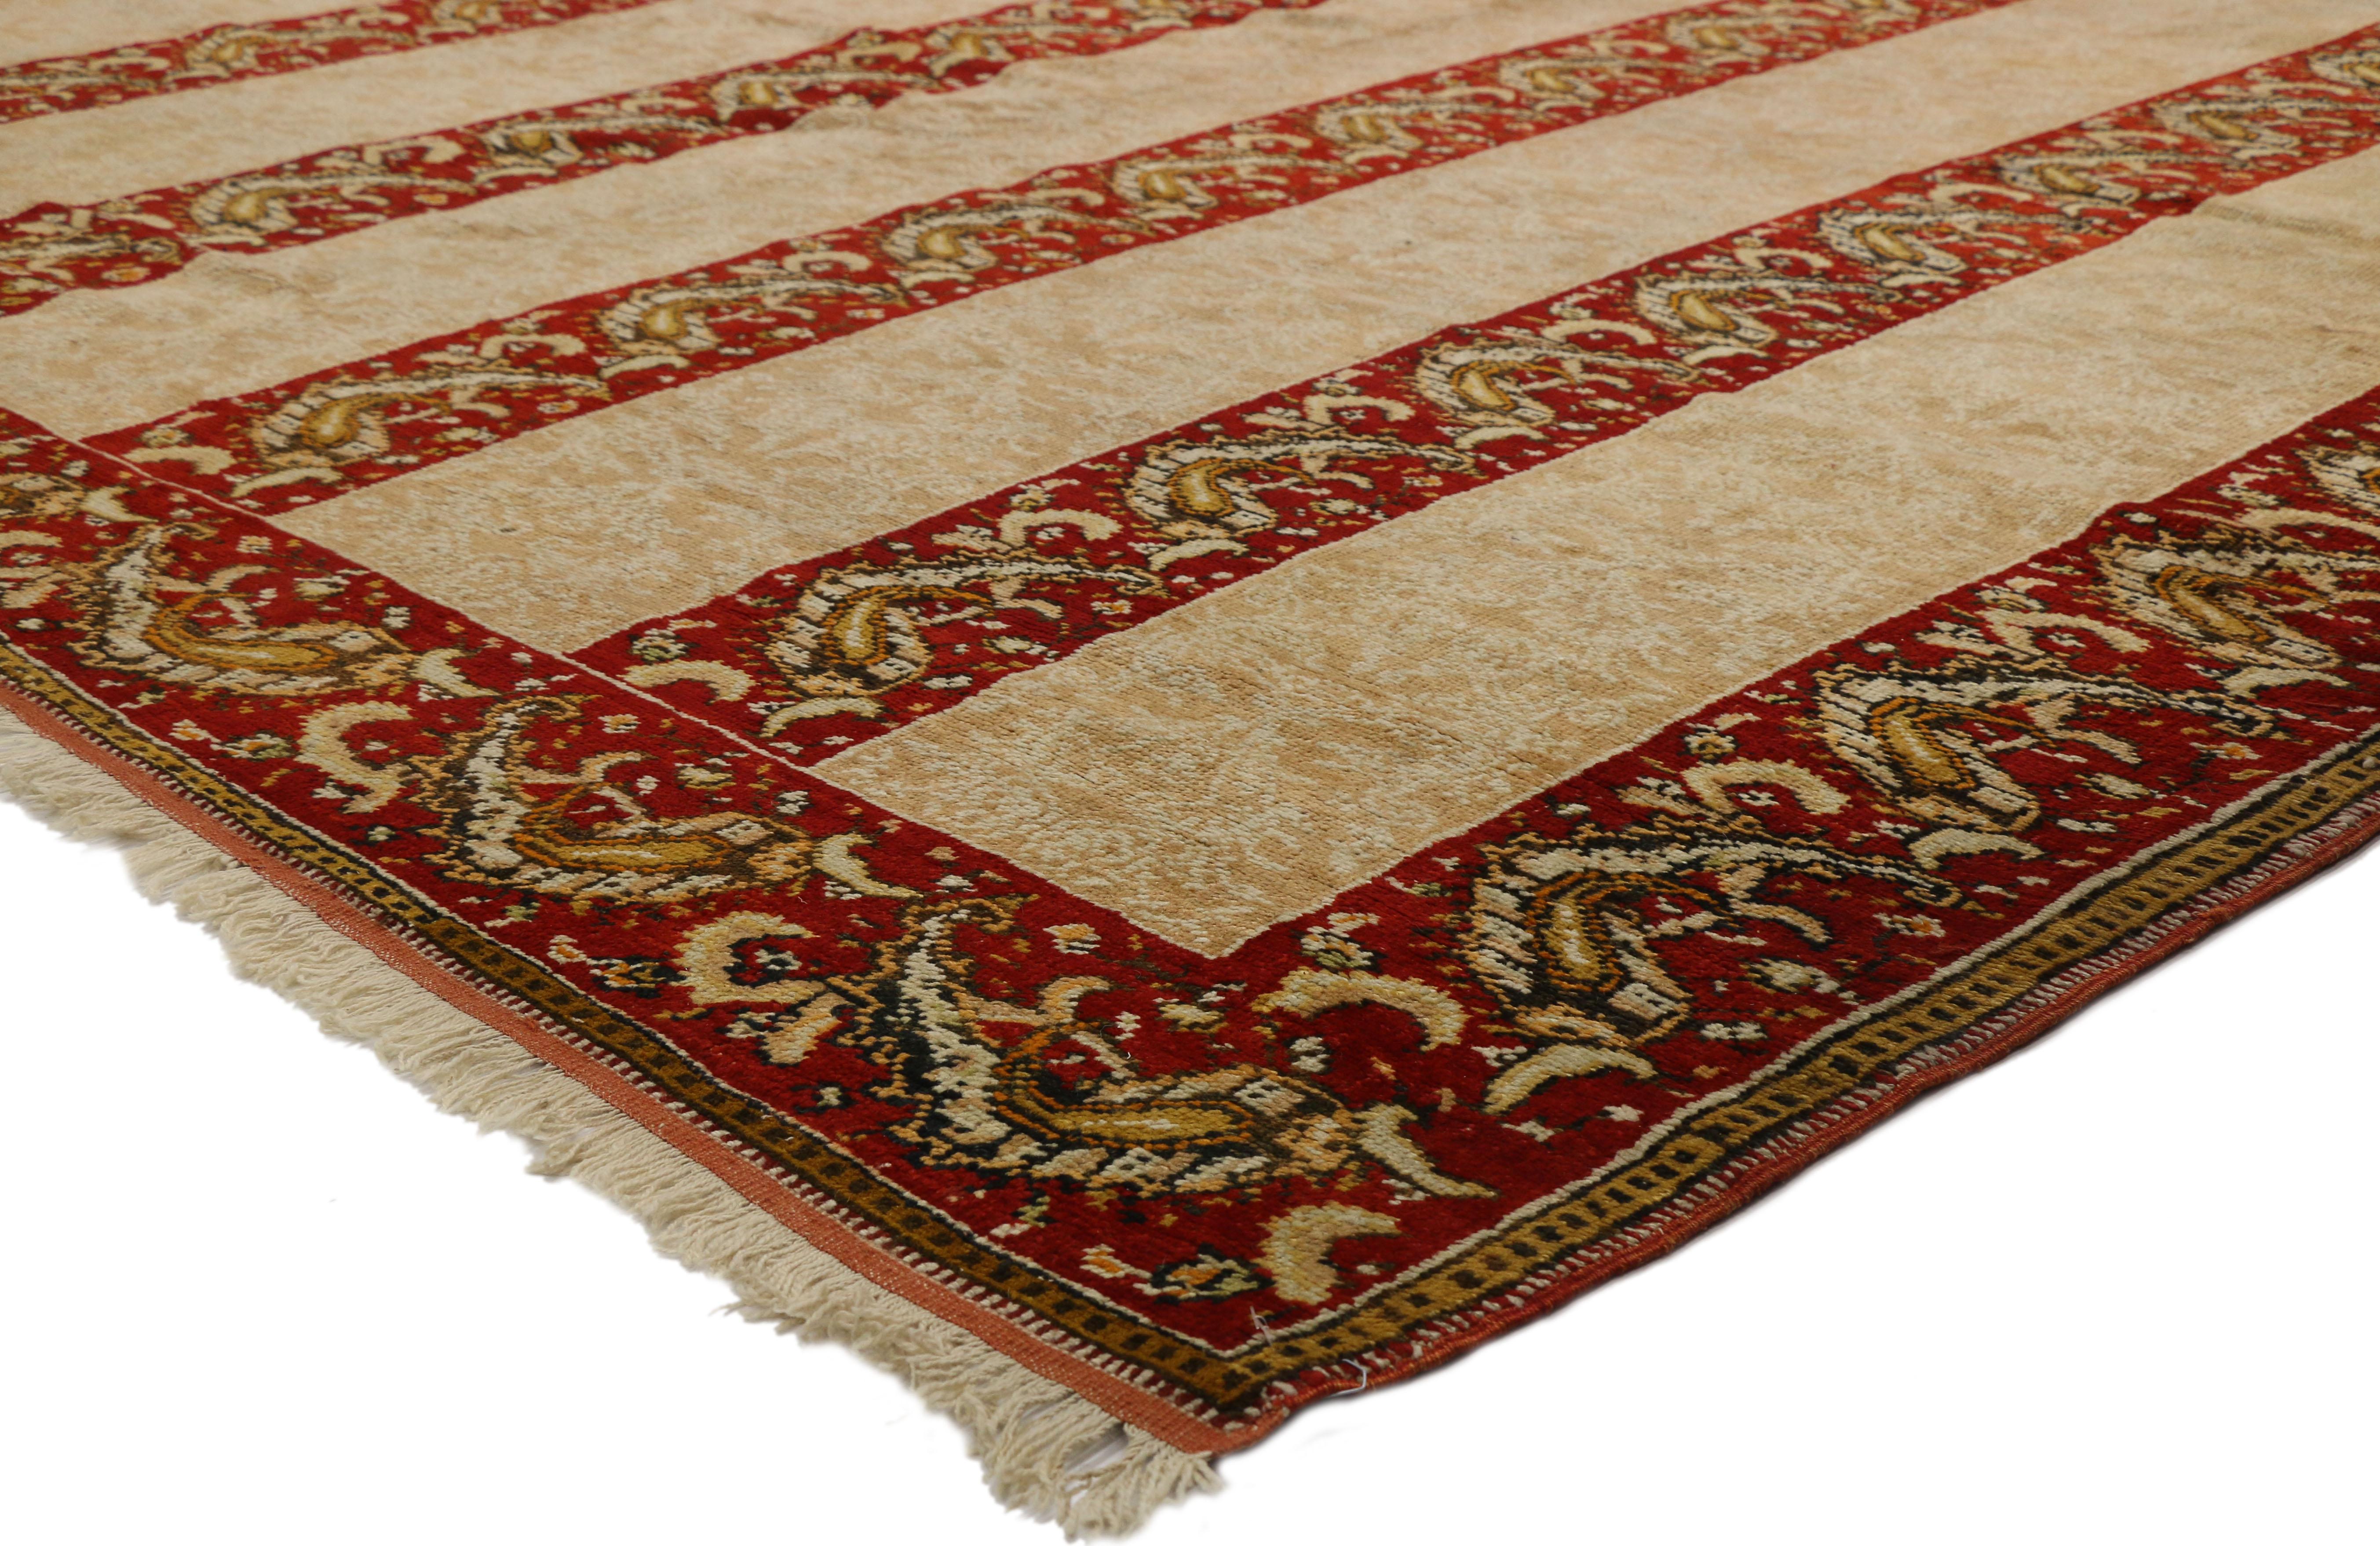 72474 Antique Turkish Oushak Rug, 16'00 x 15'07. Oushak rugs originate from the town of Oushak (also spelled Usak) in western Anatolia, Turkey. This region has a rich tradition of rug weaving that dates back centuries. Oushak rugs are renowned for